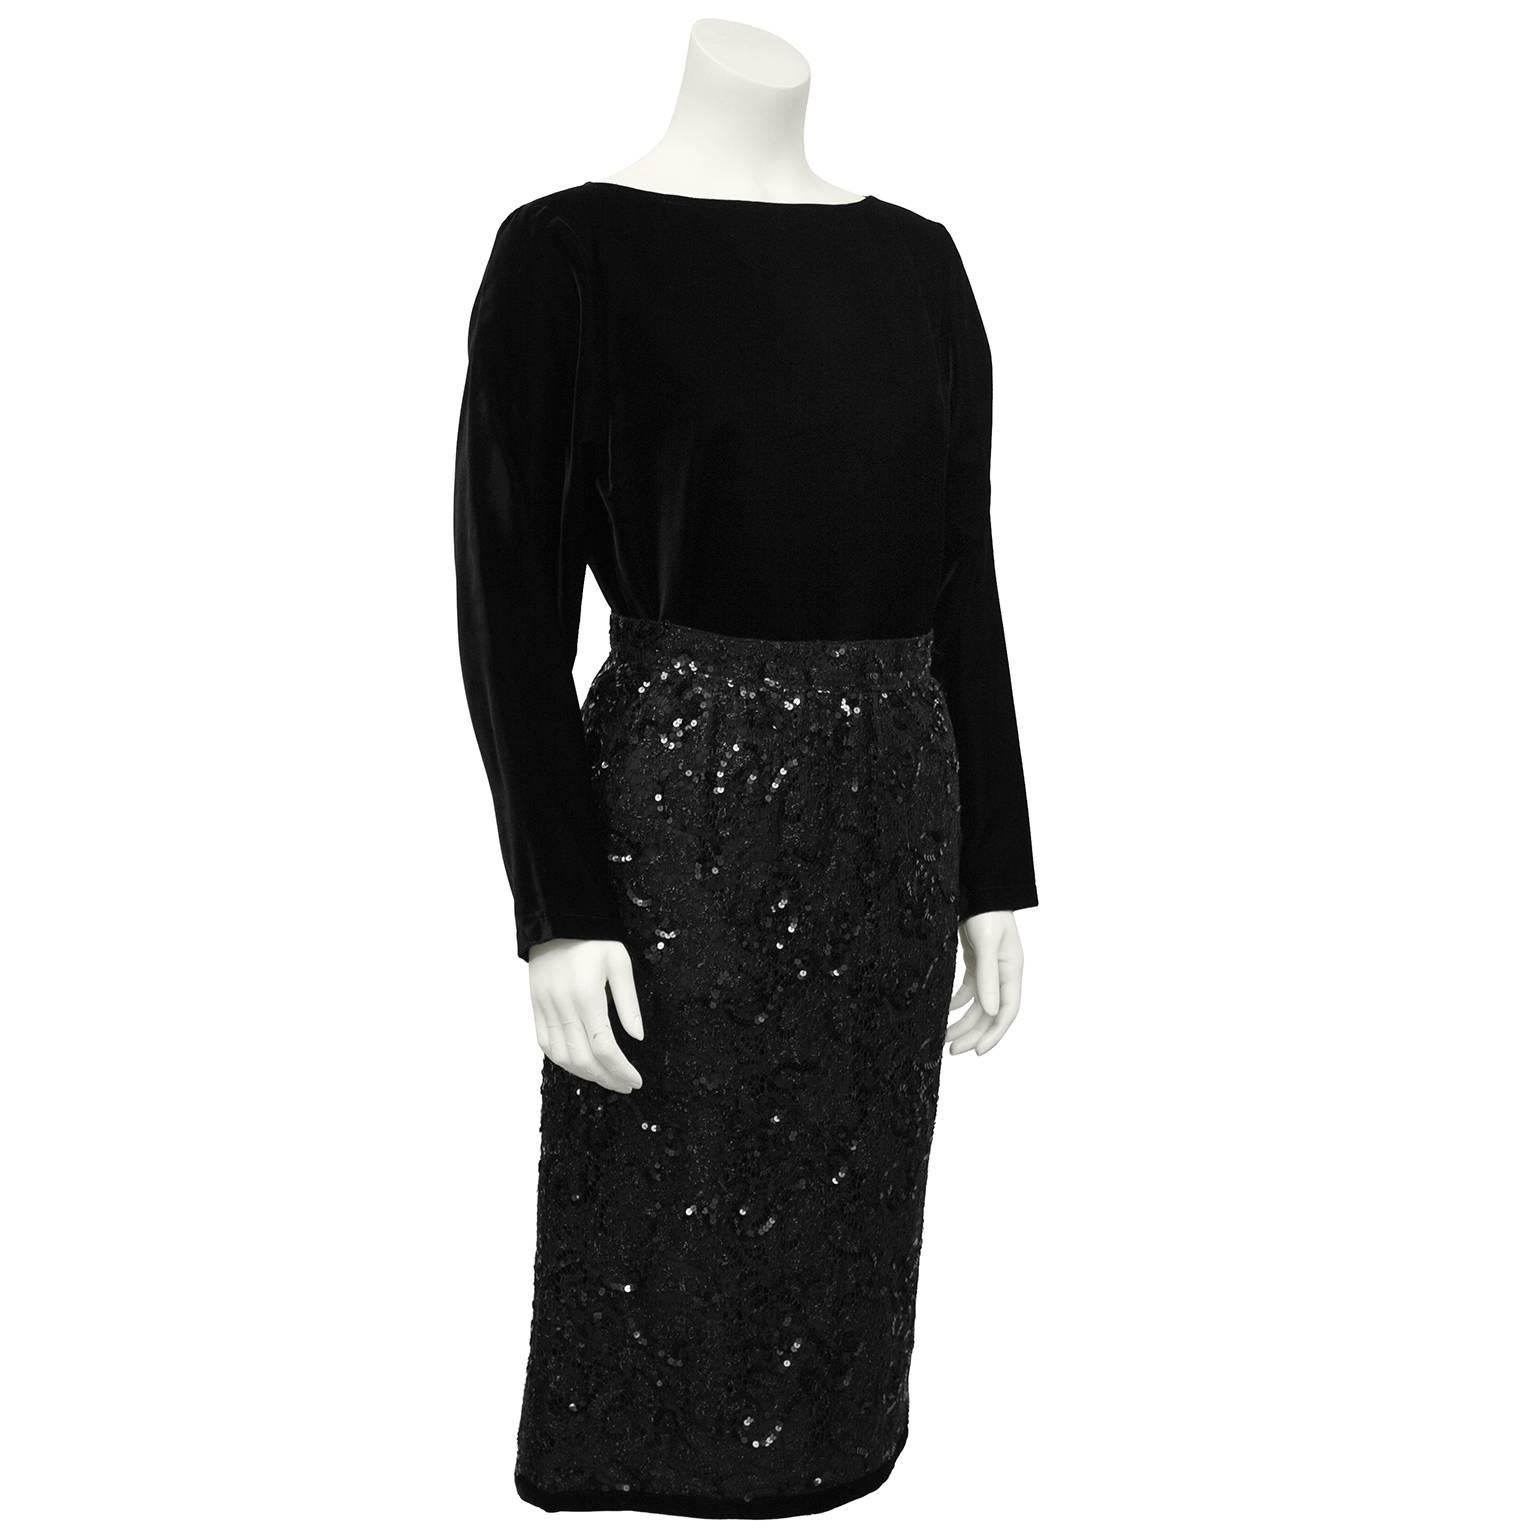 Elegant 1980s Yves Saint Laurent ensemble. Jet black long sleeve velvet top and black lace pencil skirt, embellished with small black sequins and a matching black velvet trim at hem. Great pieces that can be worn as an ensemble, or separately. US